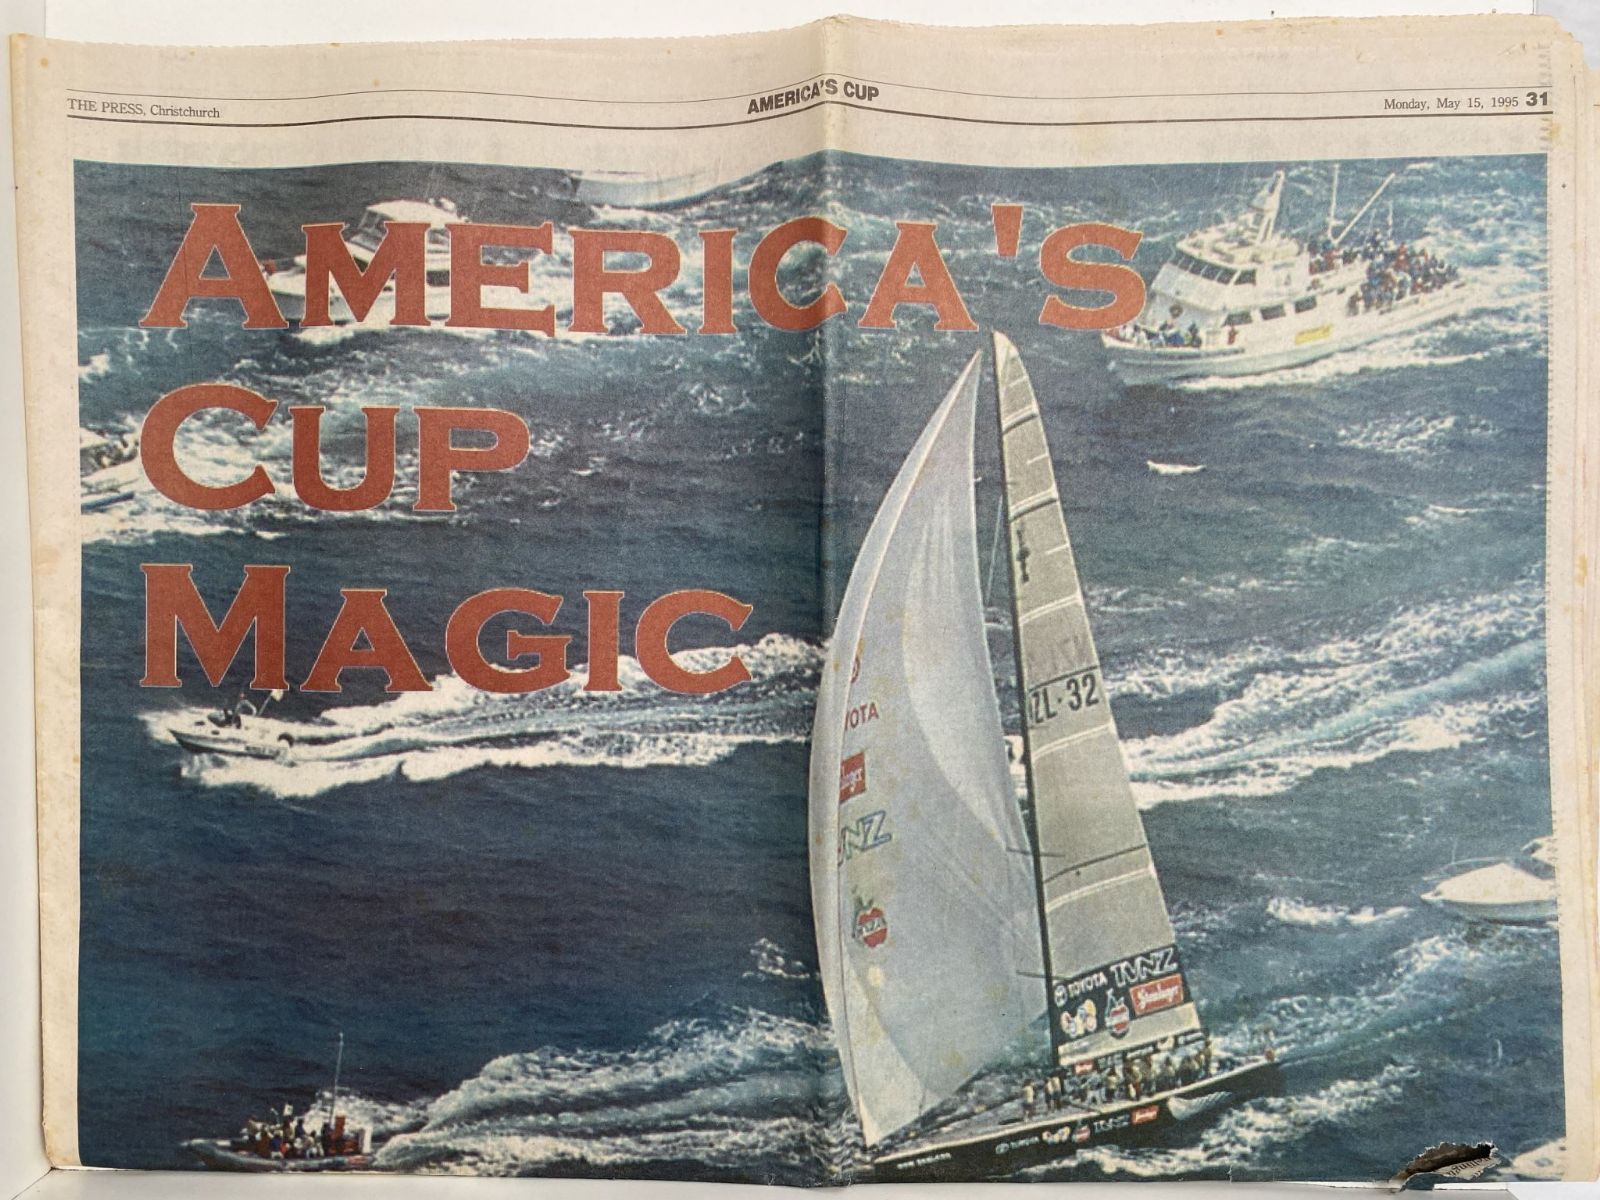 OLD NEWSPAPER: The Press, Christchurch 15 May 1995 - Americas Cup coverage